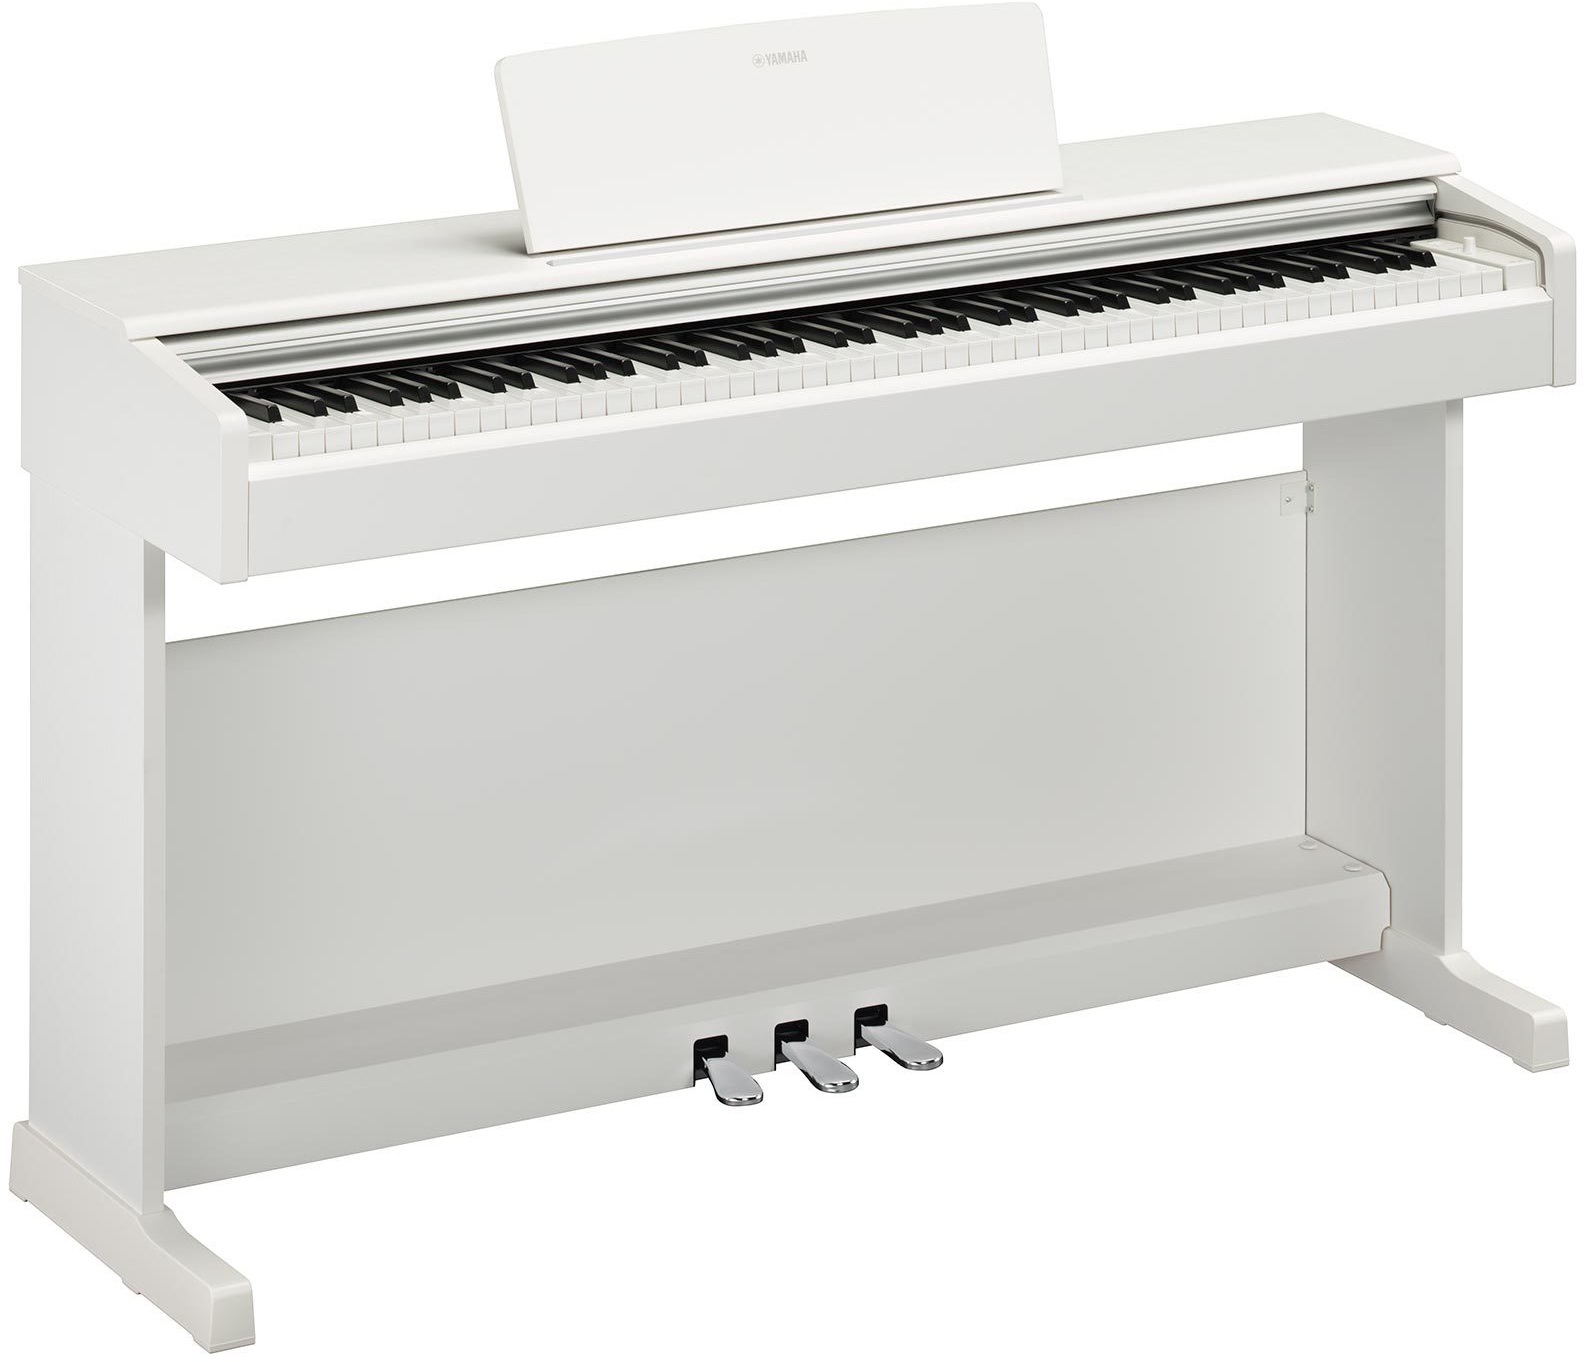 Yamaha Ydp-145 Wh - Digital piano with stand - Variation 1